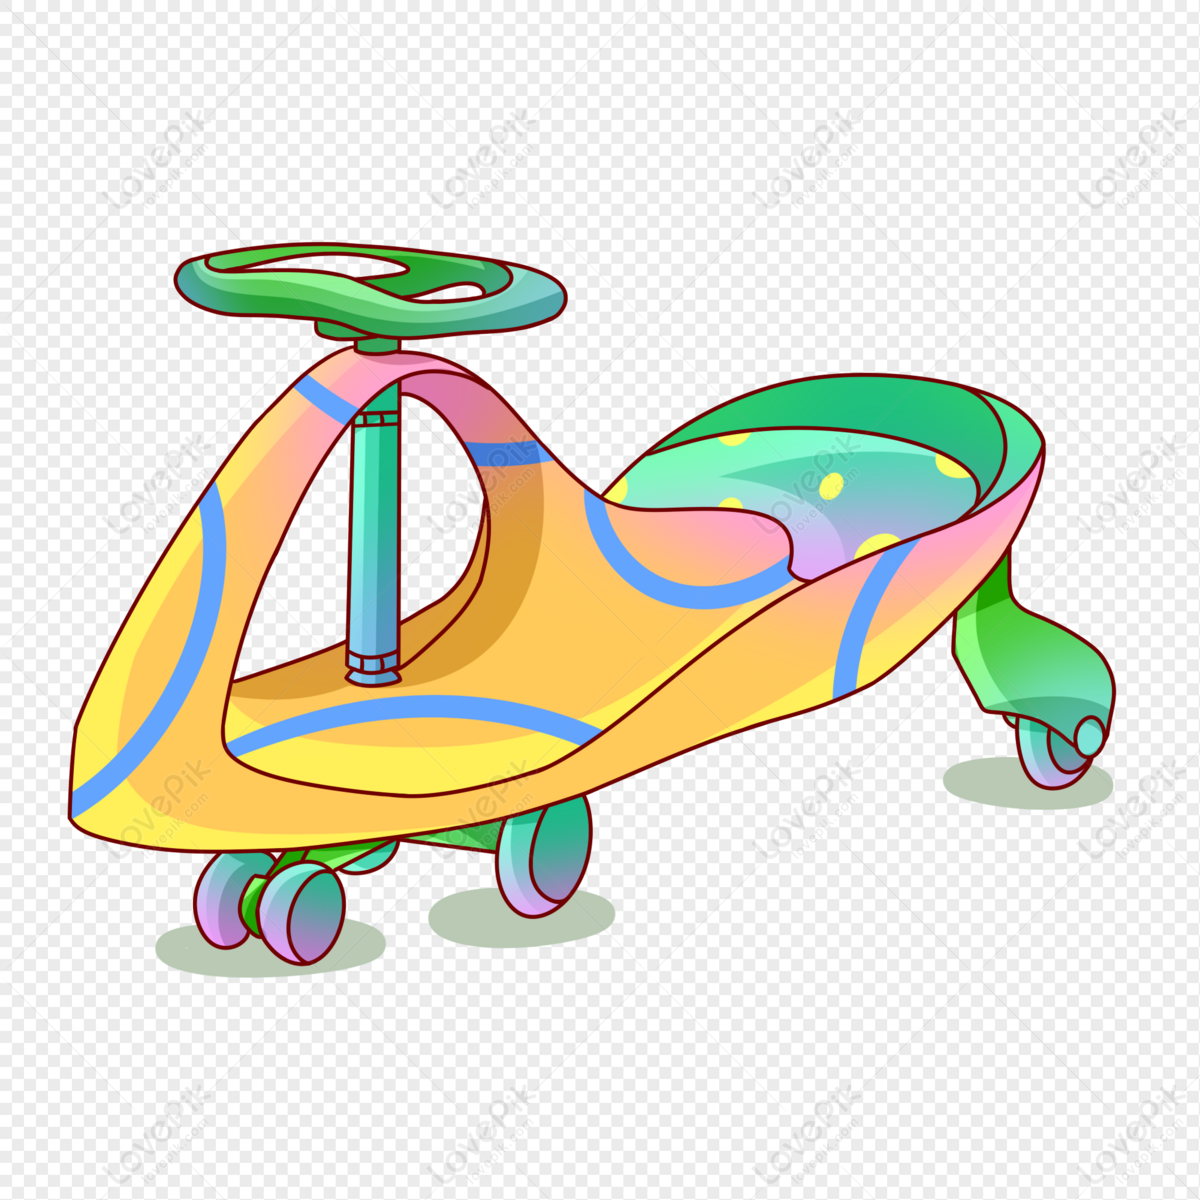 Cartoon Toy Buggy PNG Image And Clipart Image For Free Download - Lovepik |  401551528